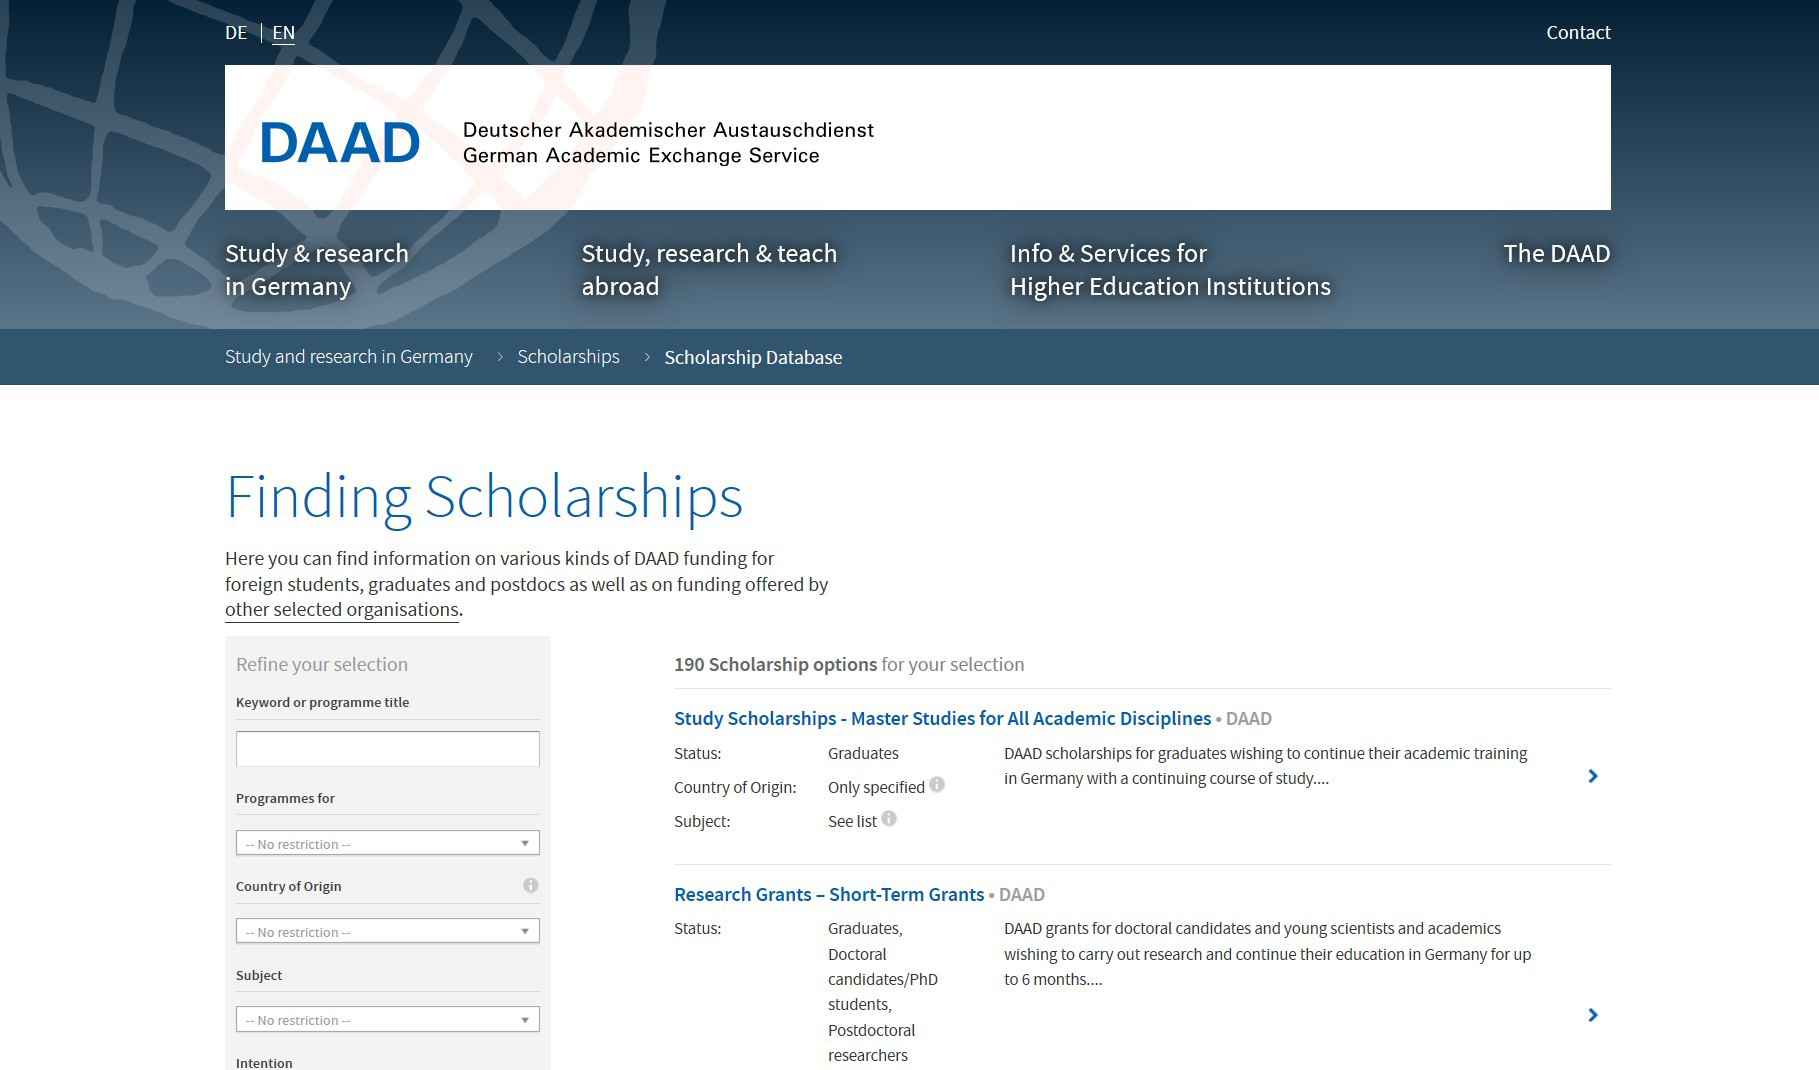 Screenshot of the scholarship overview in the scholarship database